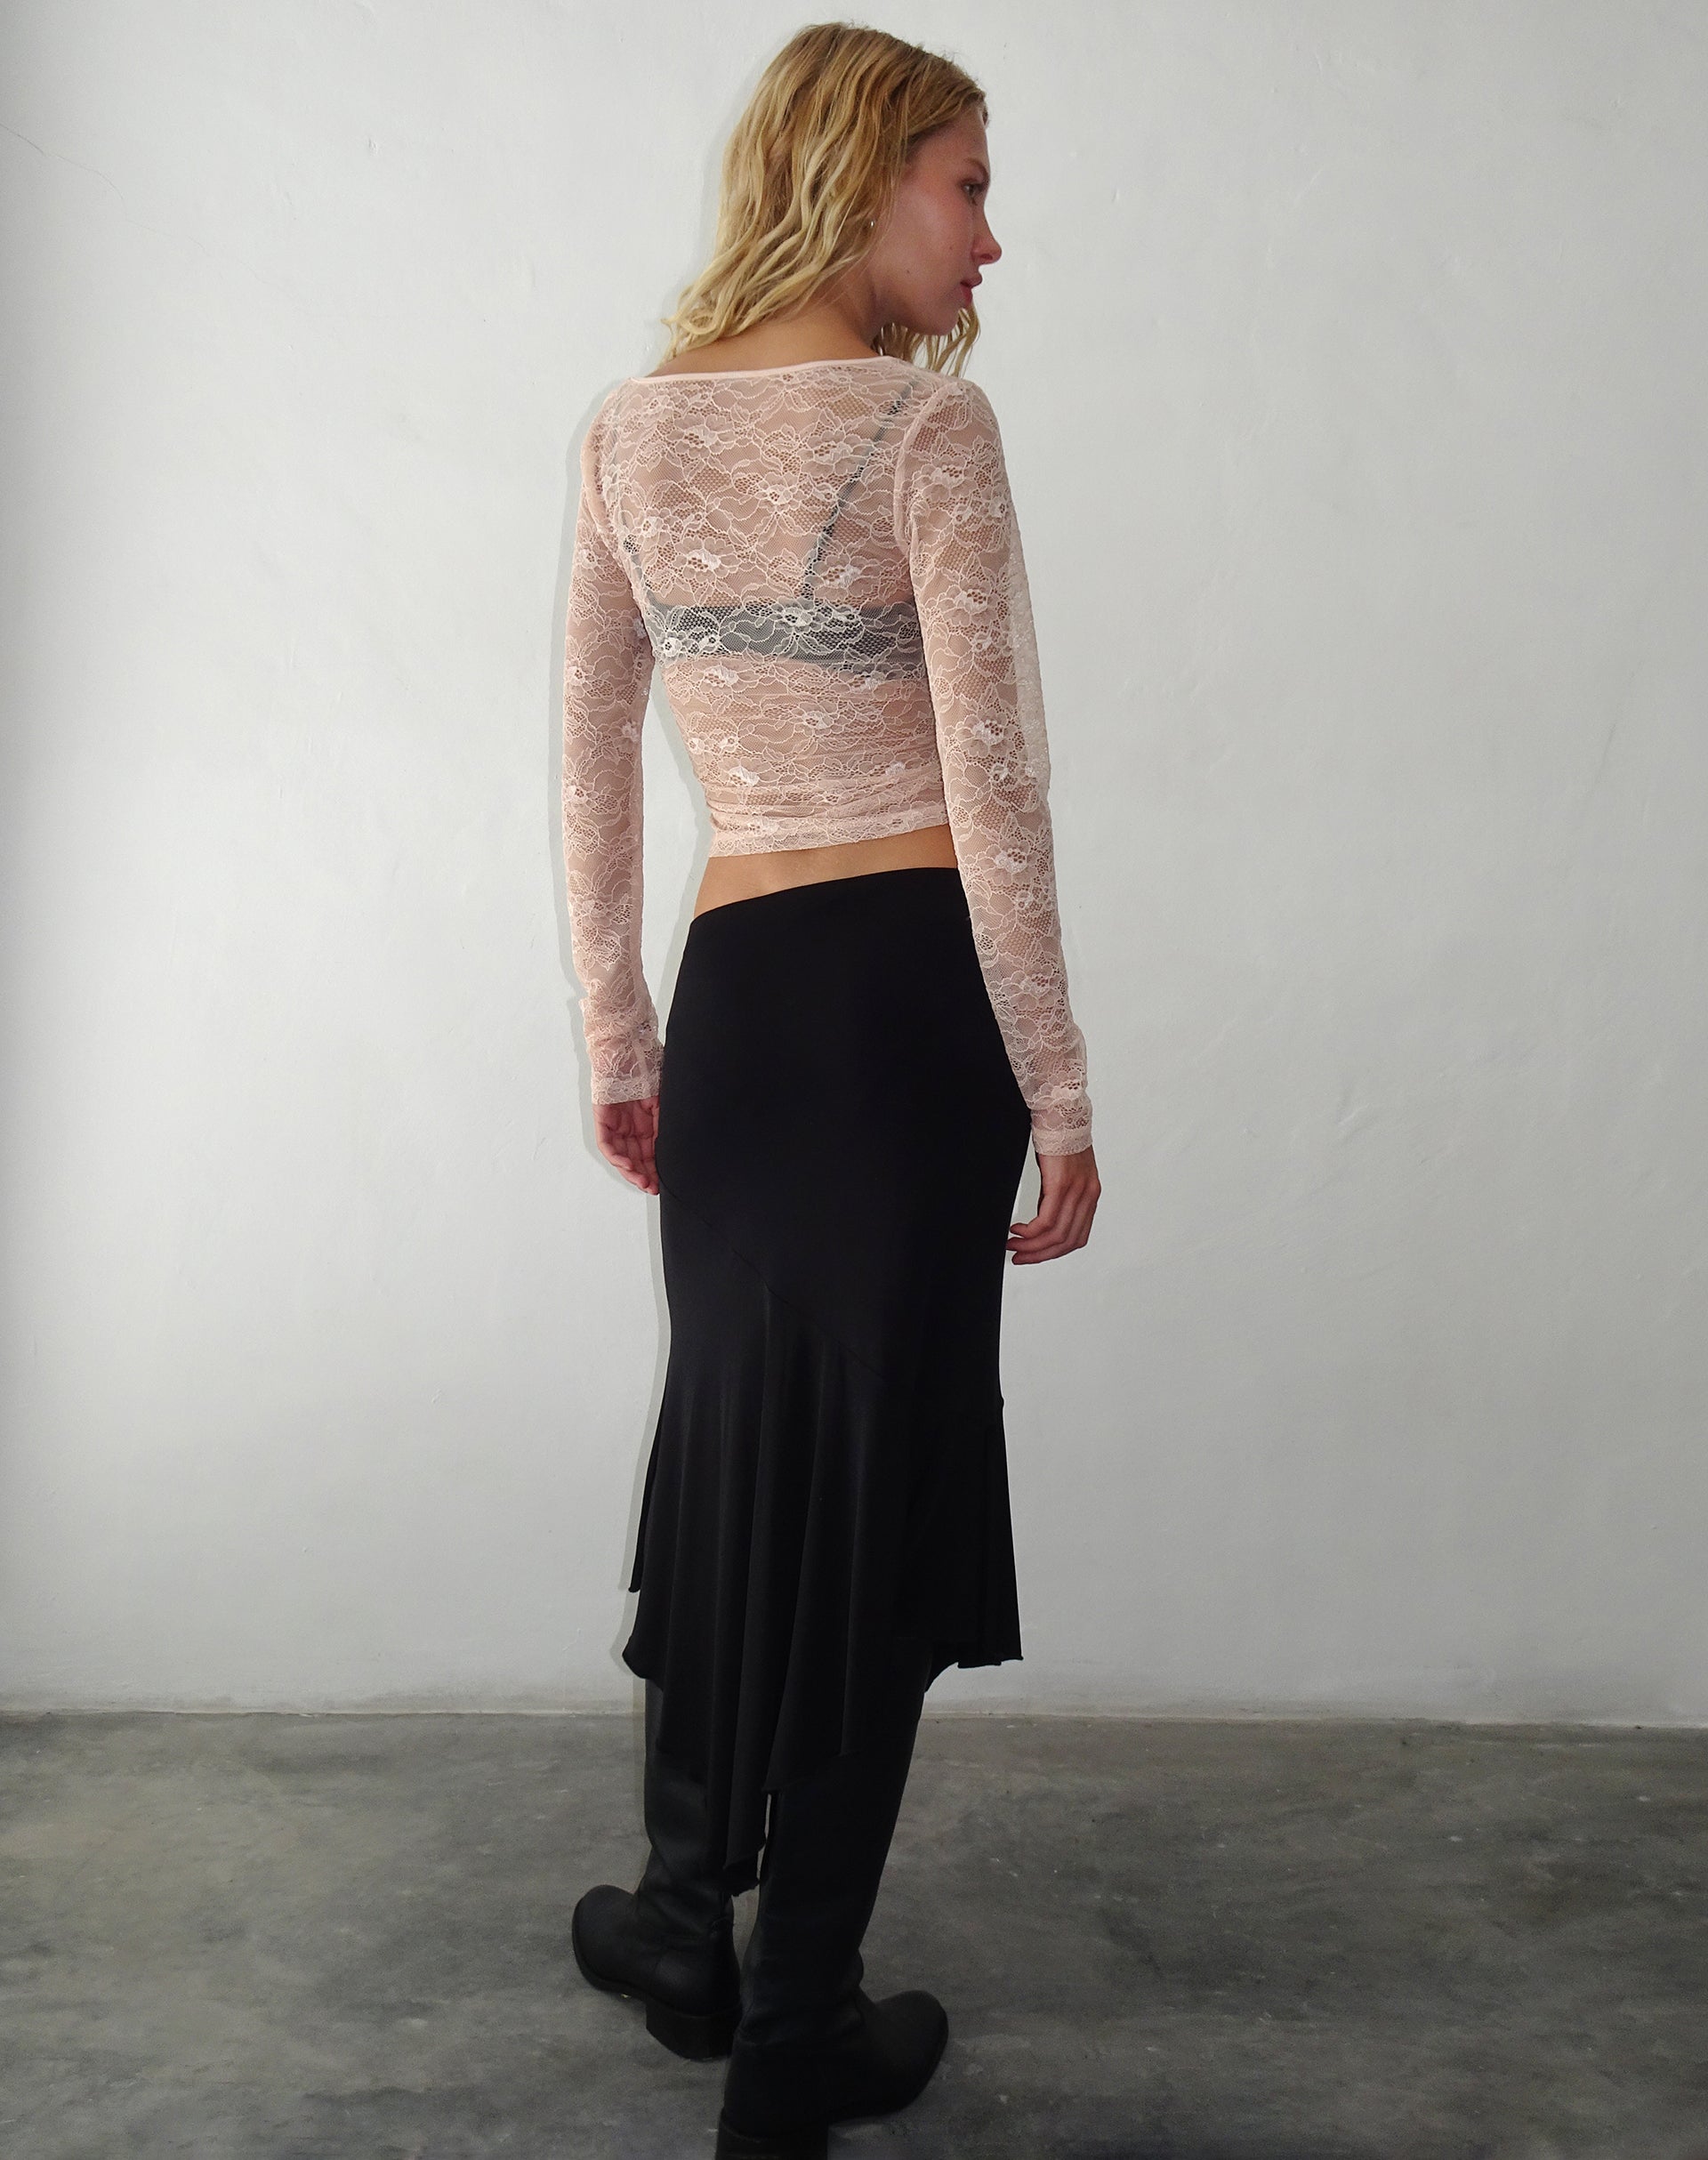 Image of Lainey Long Sleeve Lace Top in Blush